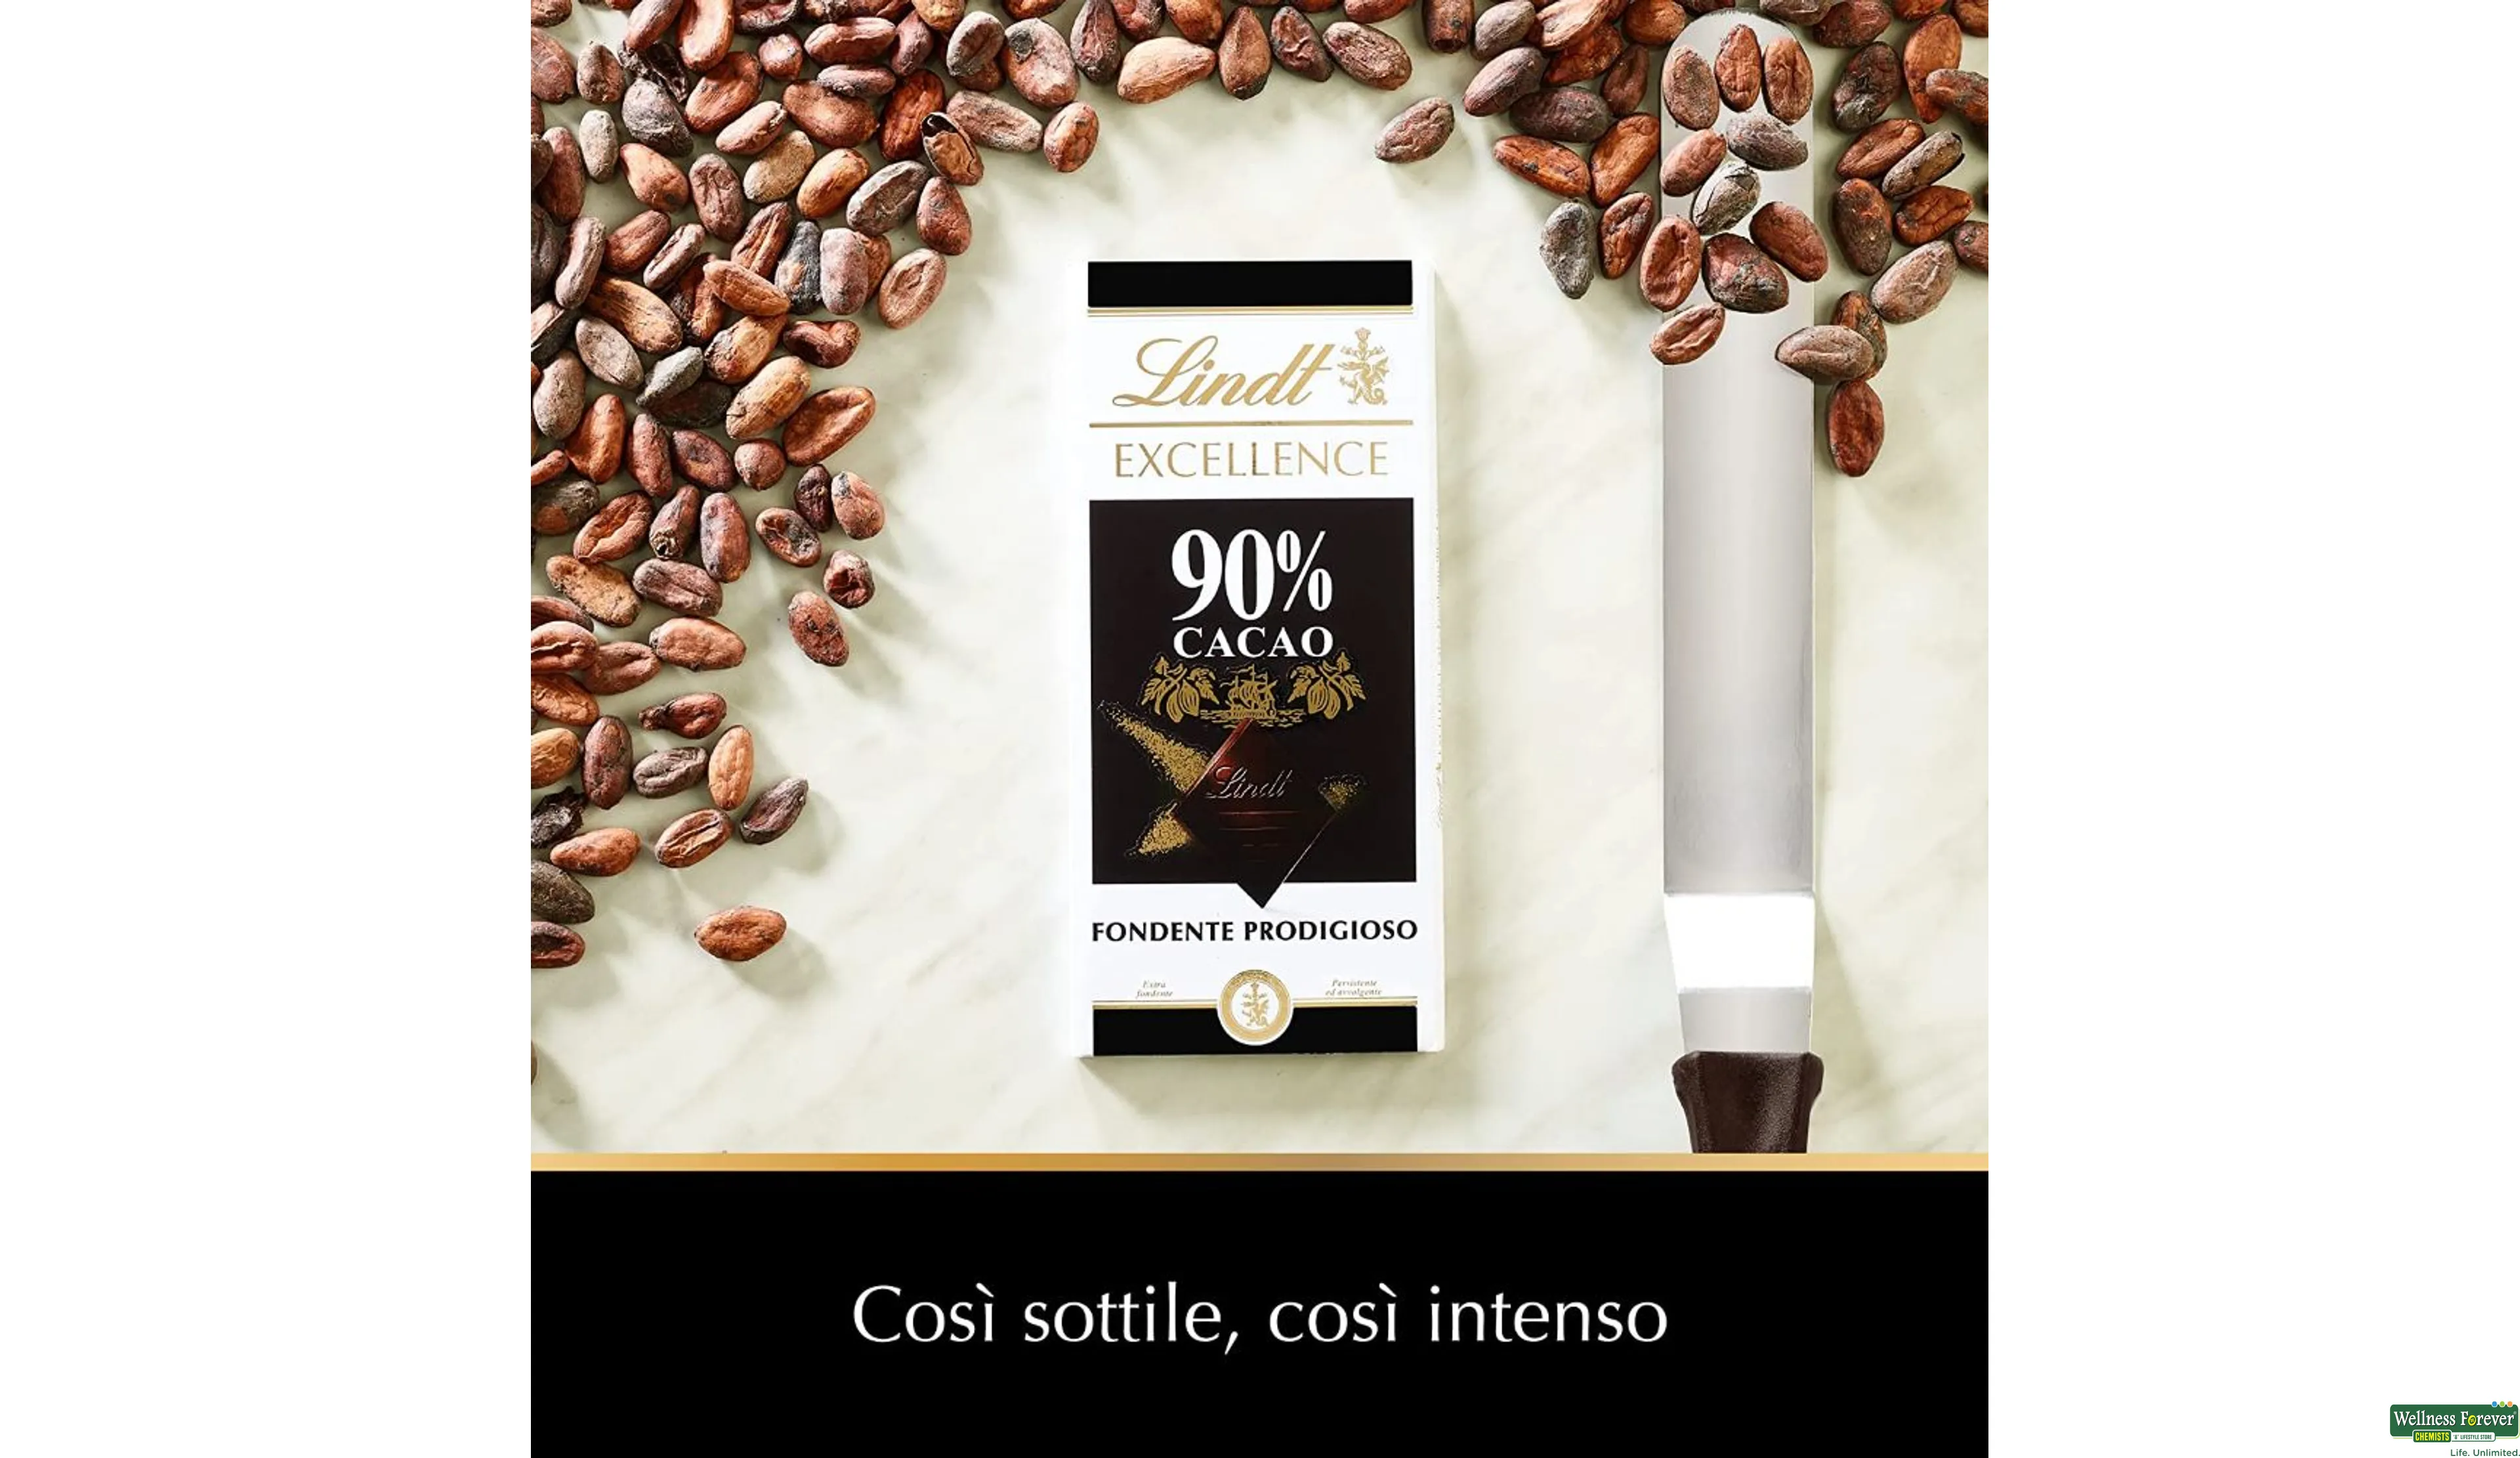 LINDT CHOC EXCE COCOA DARK 90% 100GM- 5, 100GM, 